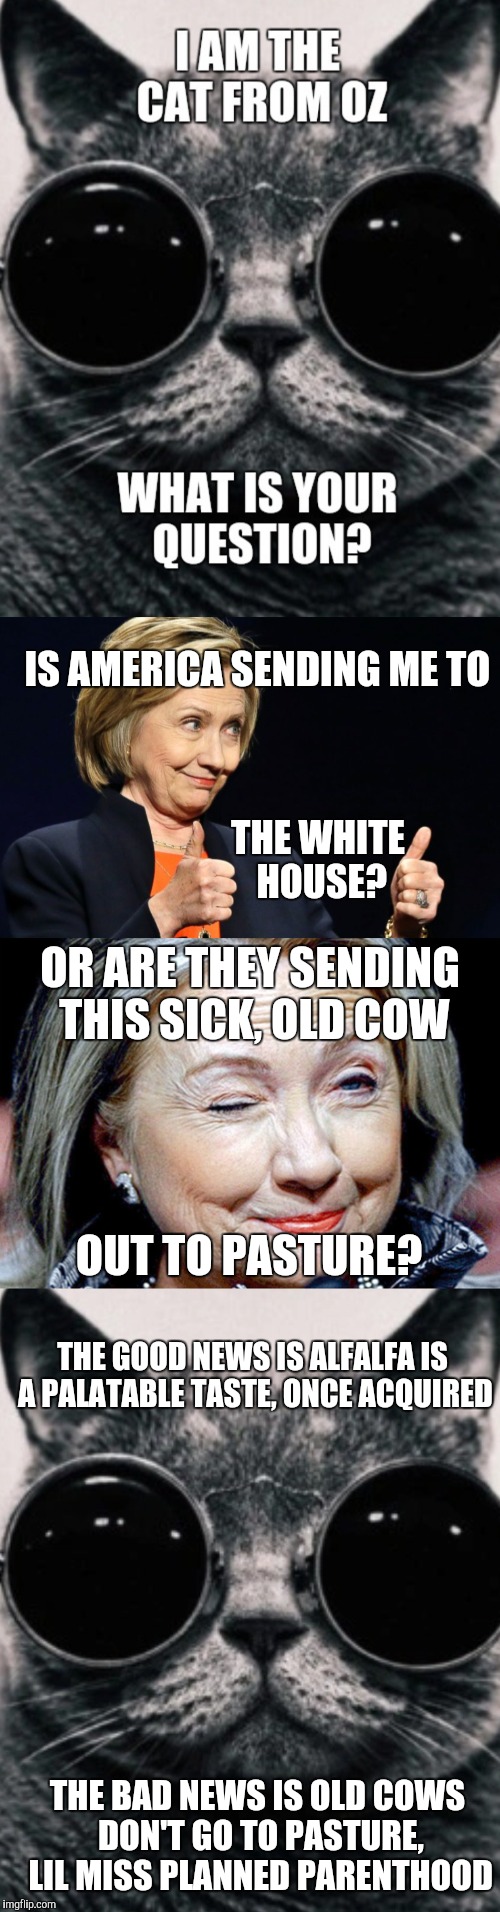 The Cat From Oz | IS AMERICA SENDING ME TO; THE WHITE HOUSE? OR ARE THEY SENDING THIS SICK, OLD COW; OUT TO PASTURE? THE GOOD NEWS IS ALFALFA IS A PALATABLE TASTE, ONCE ACQUIRED; THE BAD NEWS IS OLD COWS DON'T GO TO PASTURE, LIL MISS PLANNED PARENTHOOD | image tagged in wizard of oz | made w/ Imgflip meme maker